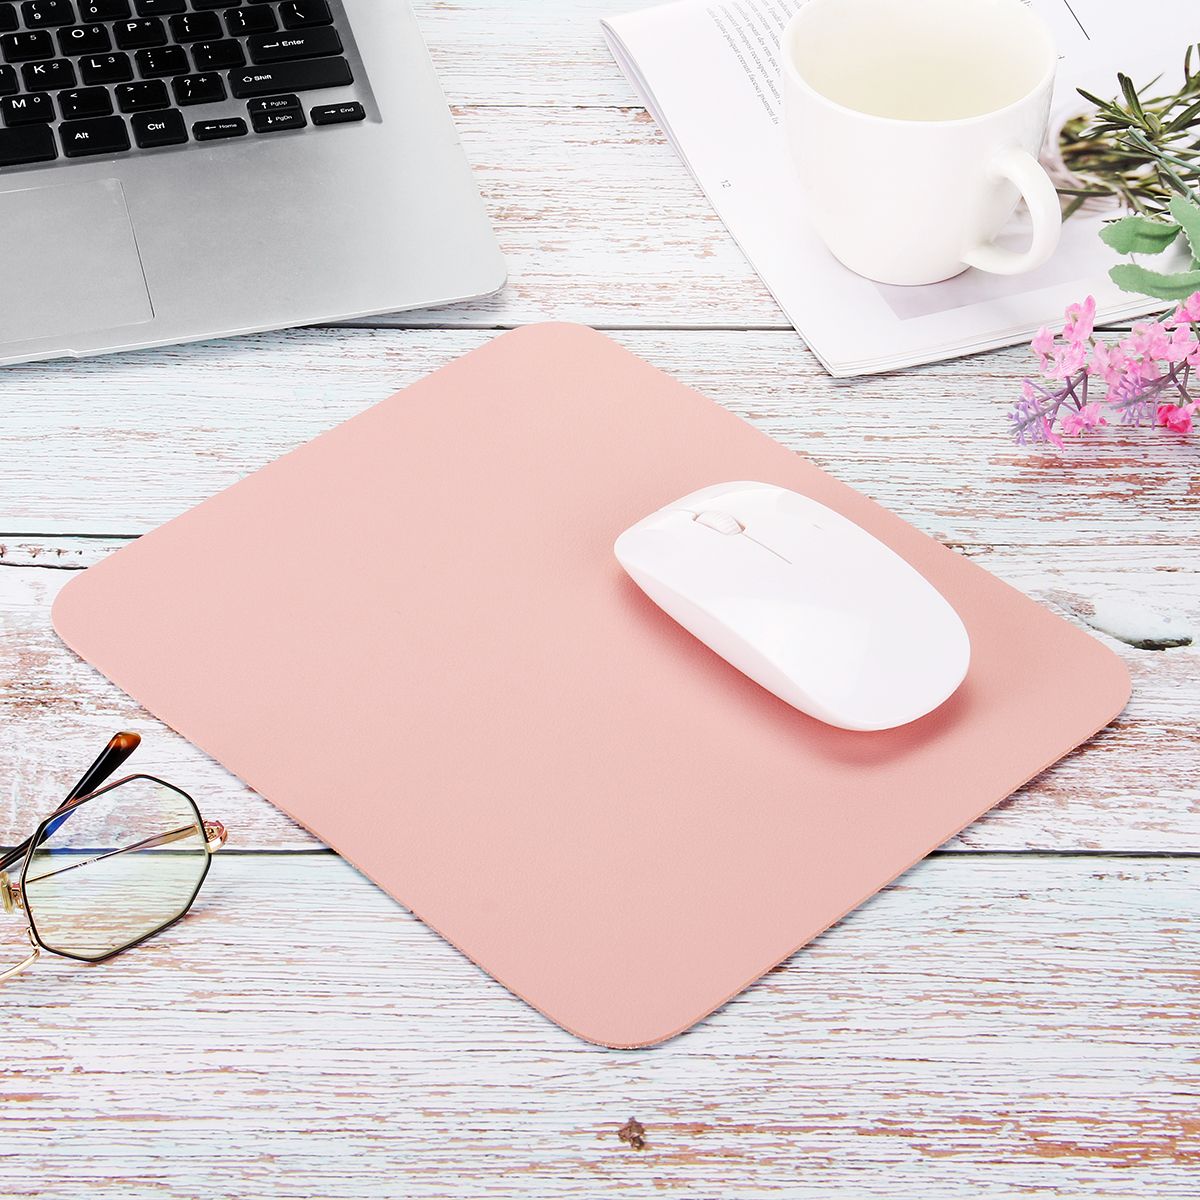 Waterproof-Mouse-Pad-Office-Gaming-Desk-Mat-Single-Side-Multi-colored-PU-Leather-PVC-Pad-for-Mouse-K-1749963